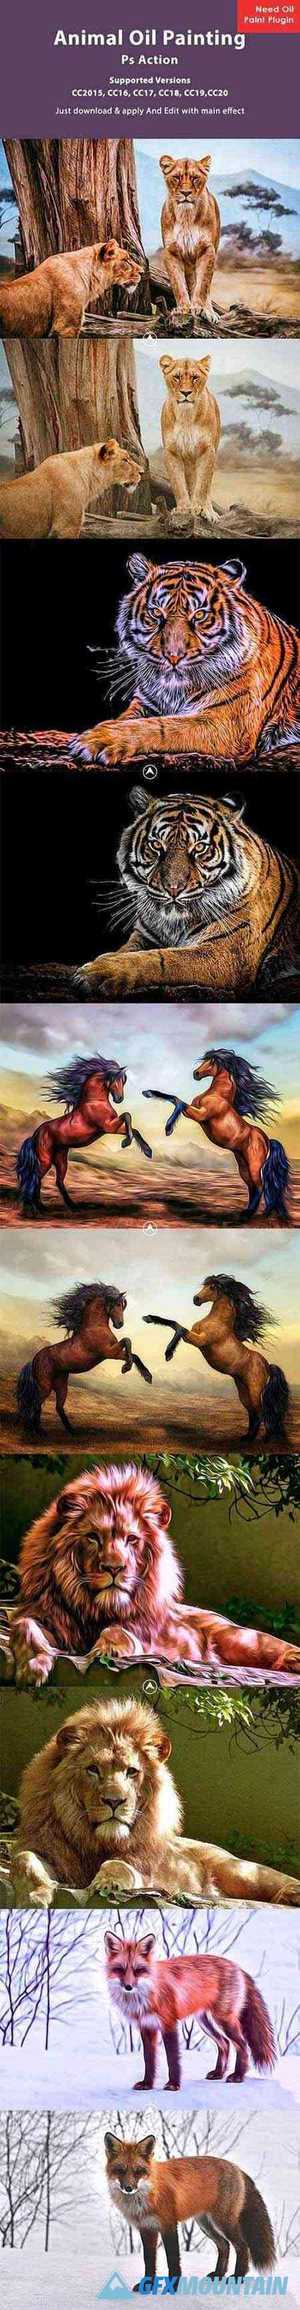 Animal Oil Painting Photoshop Action 26608753